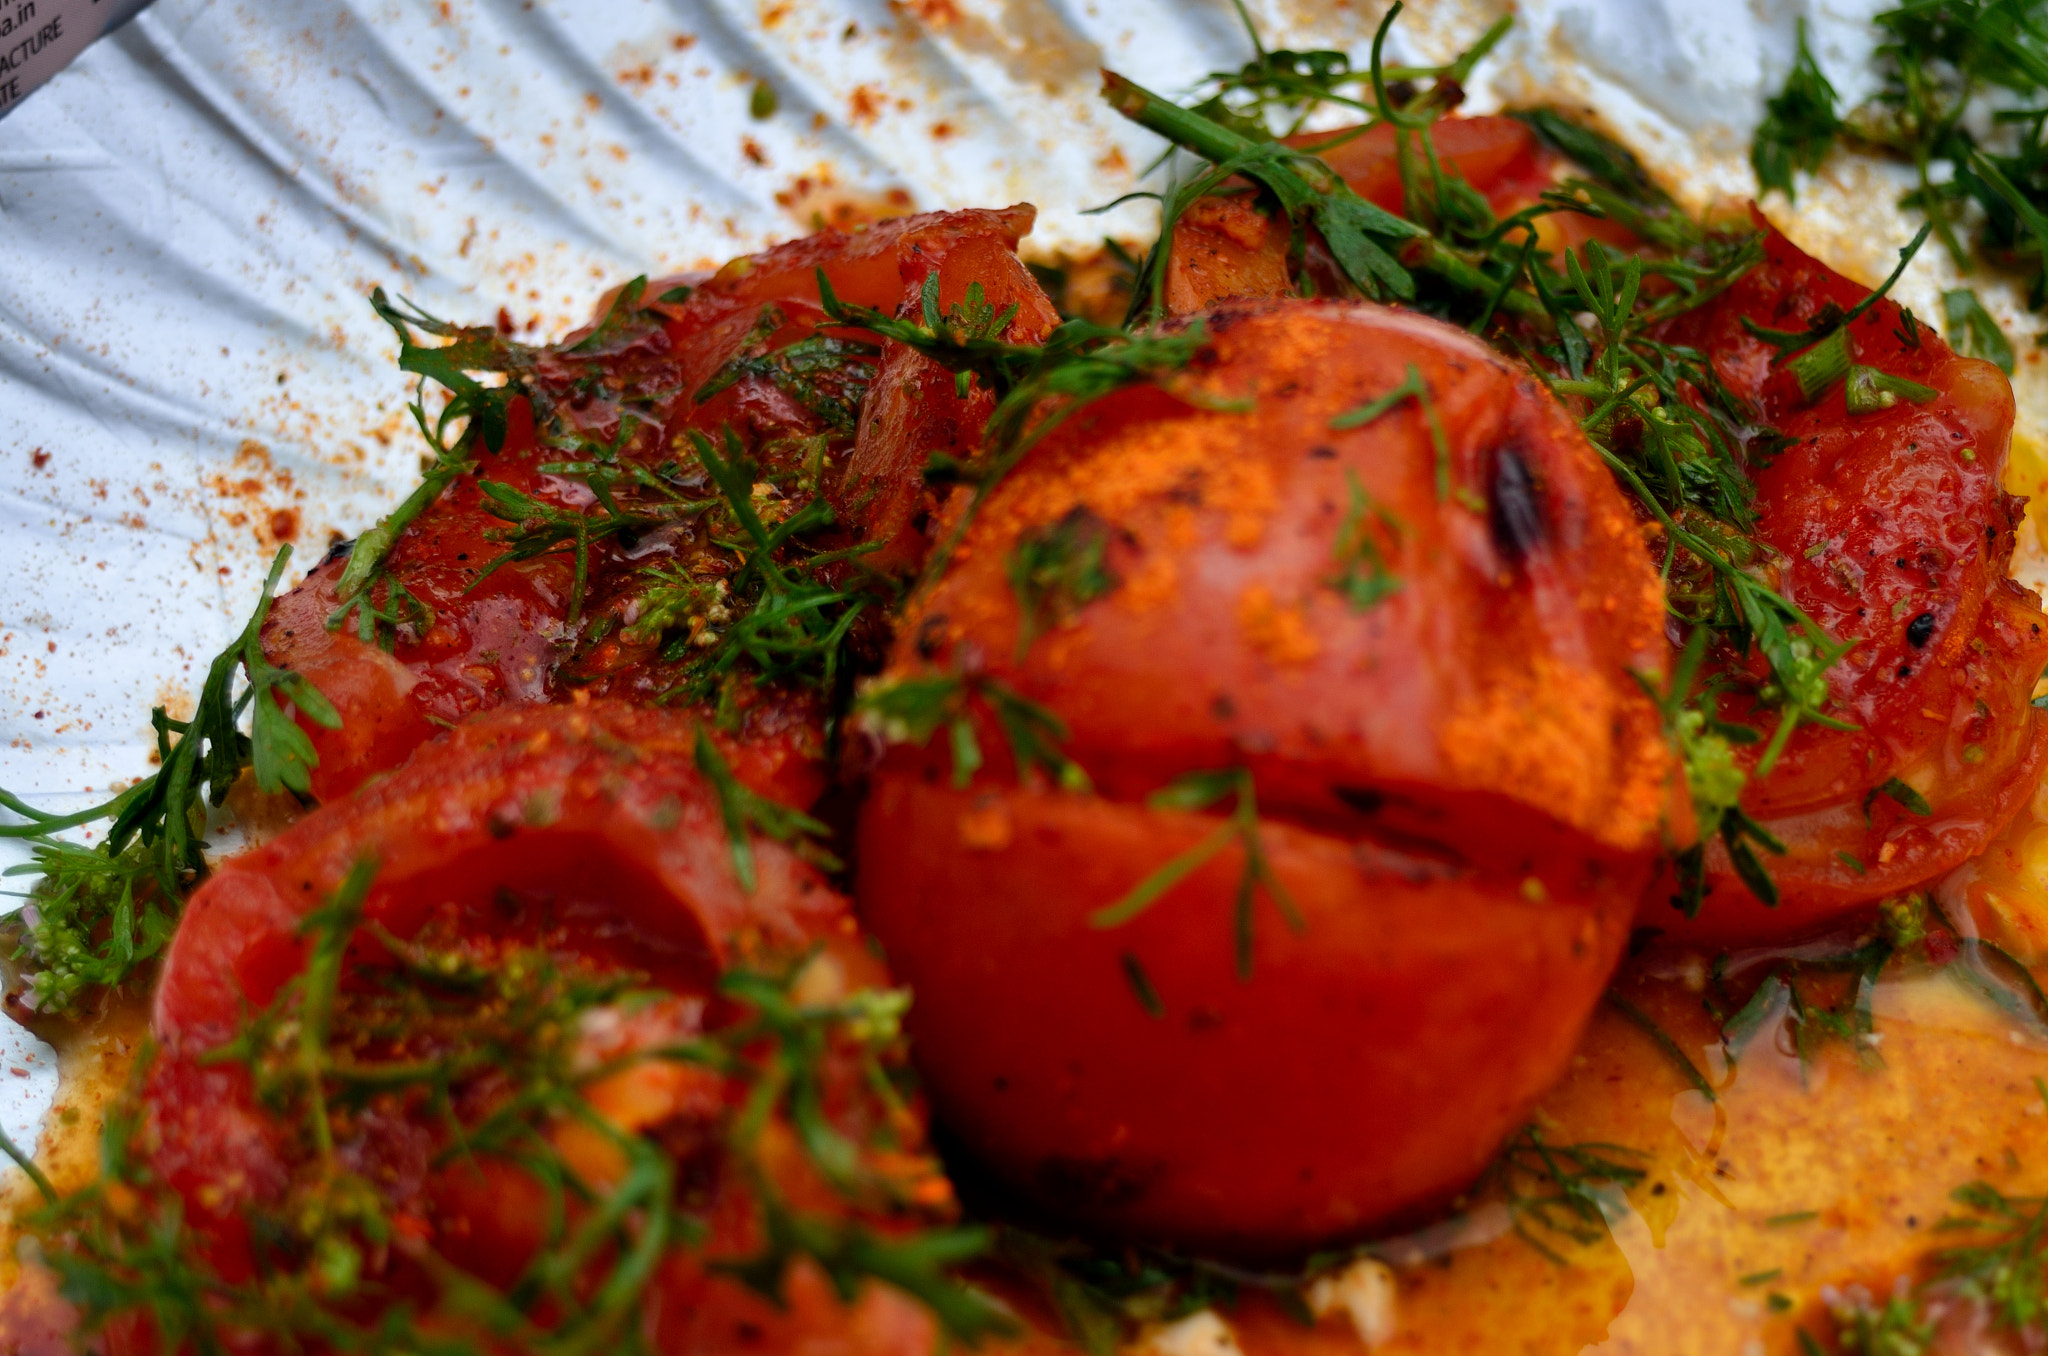 AF Zoom-Nikkor 28-80mm f/3.5-5.6D sample photo. Yummy! grilled tomatoes photography